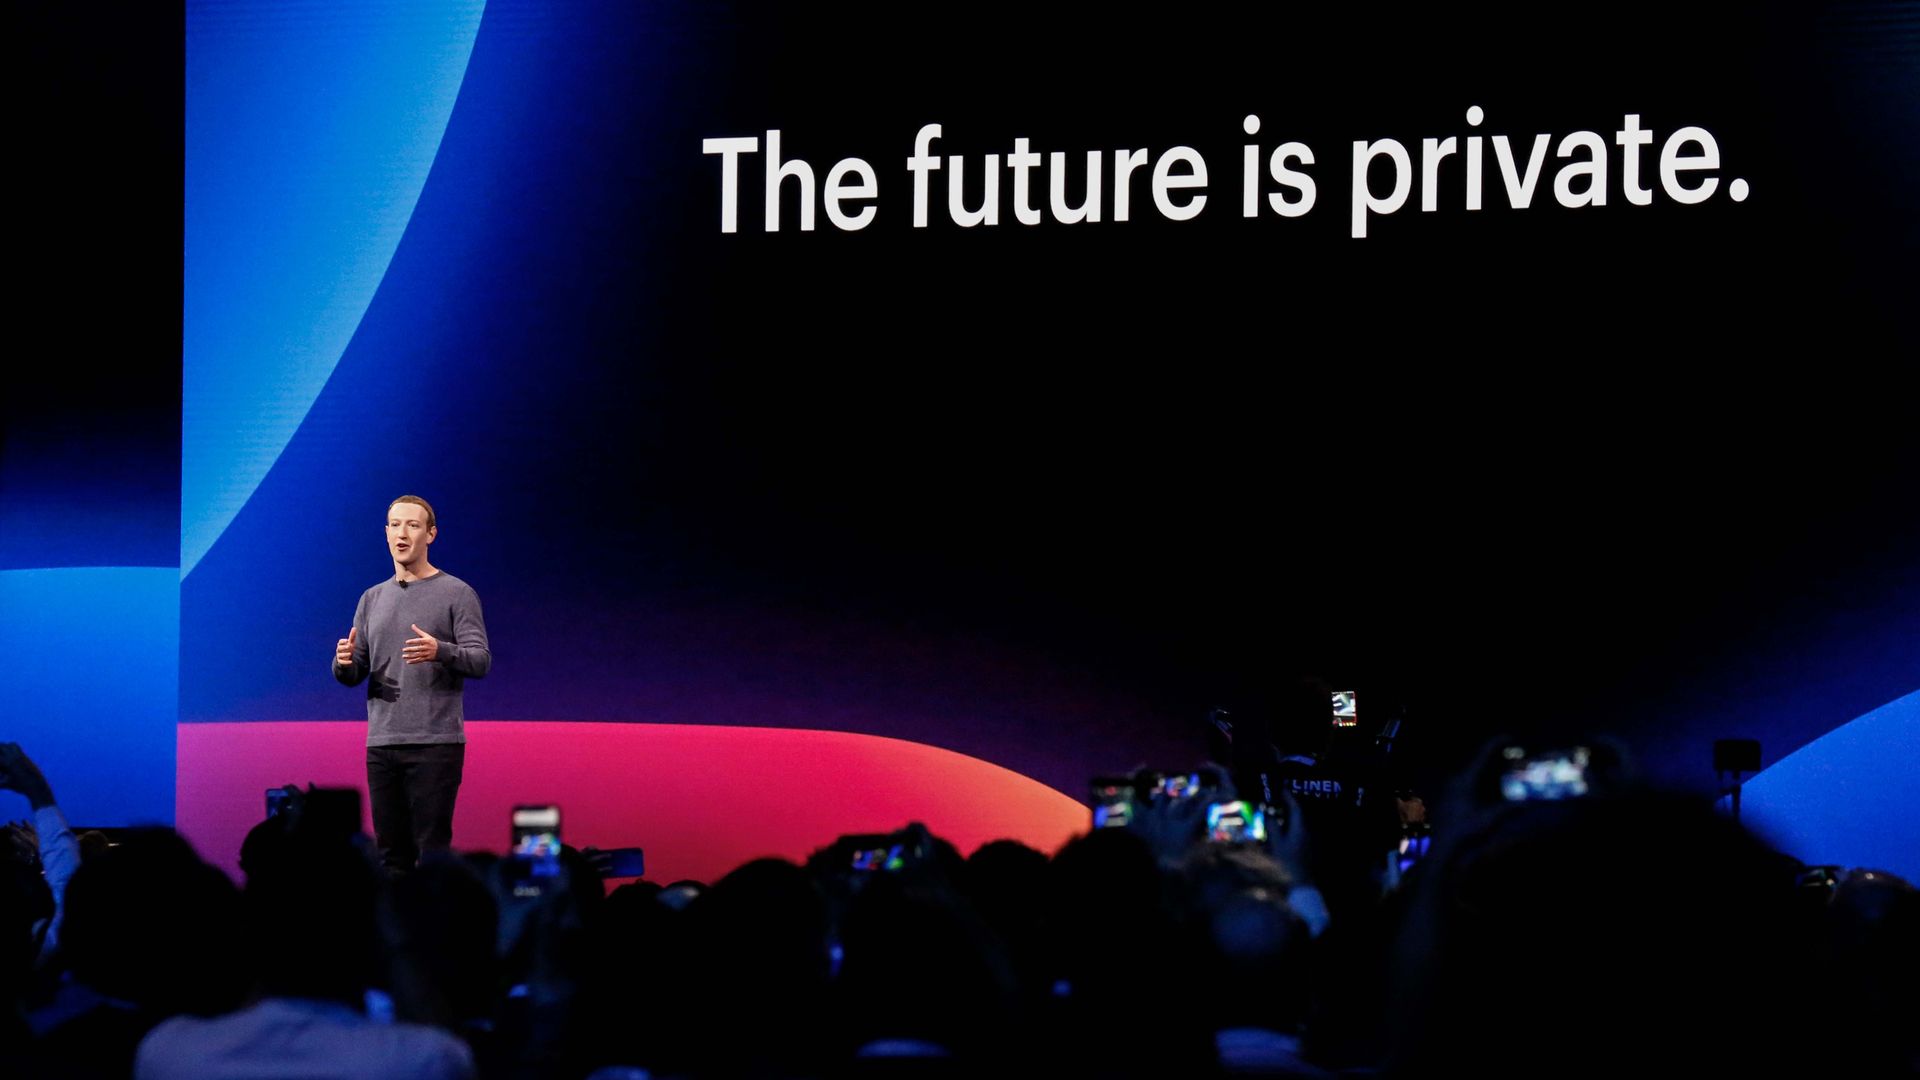 Photo of Mark Zuckerberg on stage in front of a slide reading "The future is private"